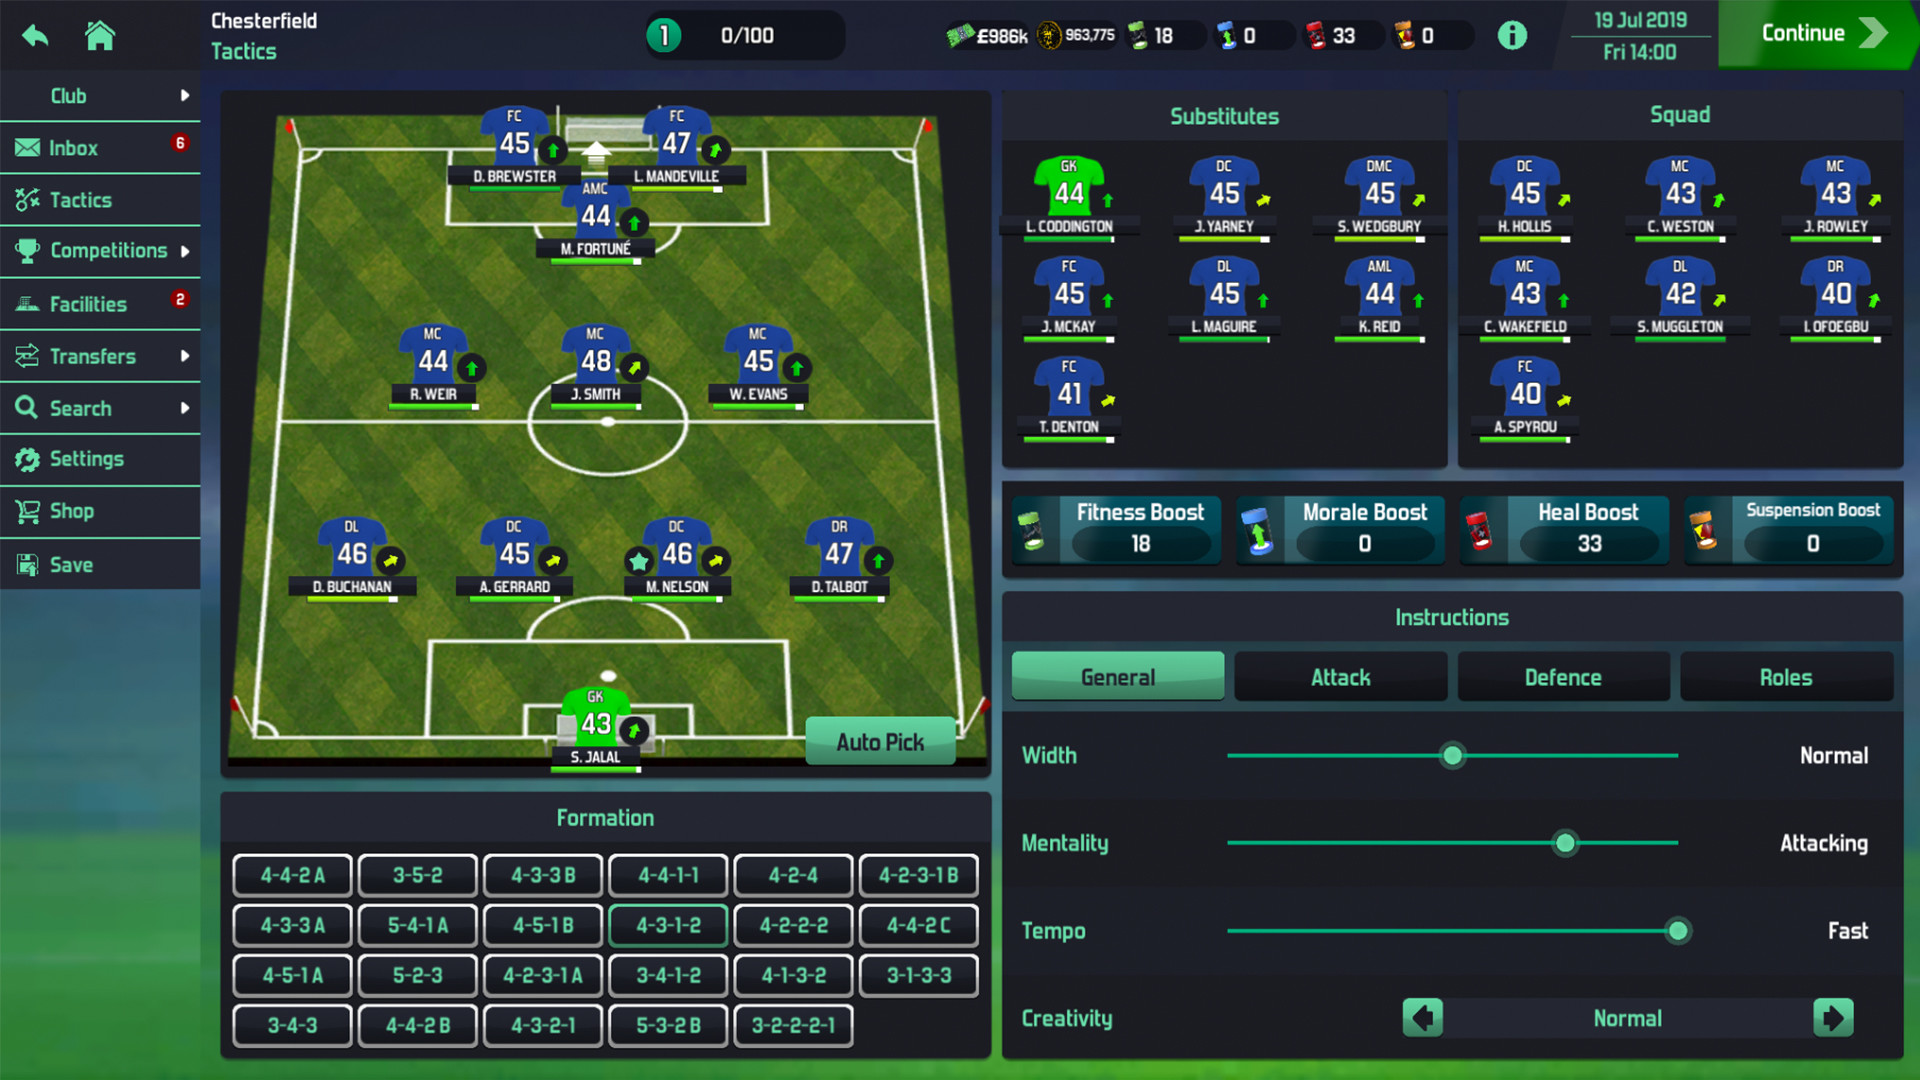 download free soccer manager 2013